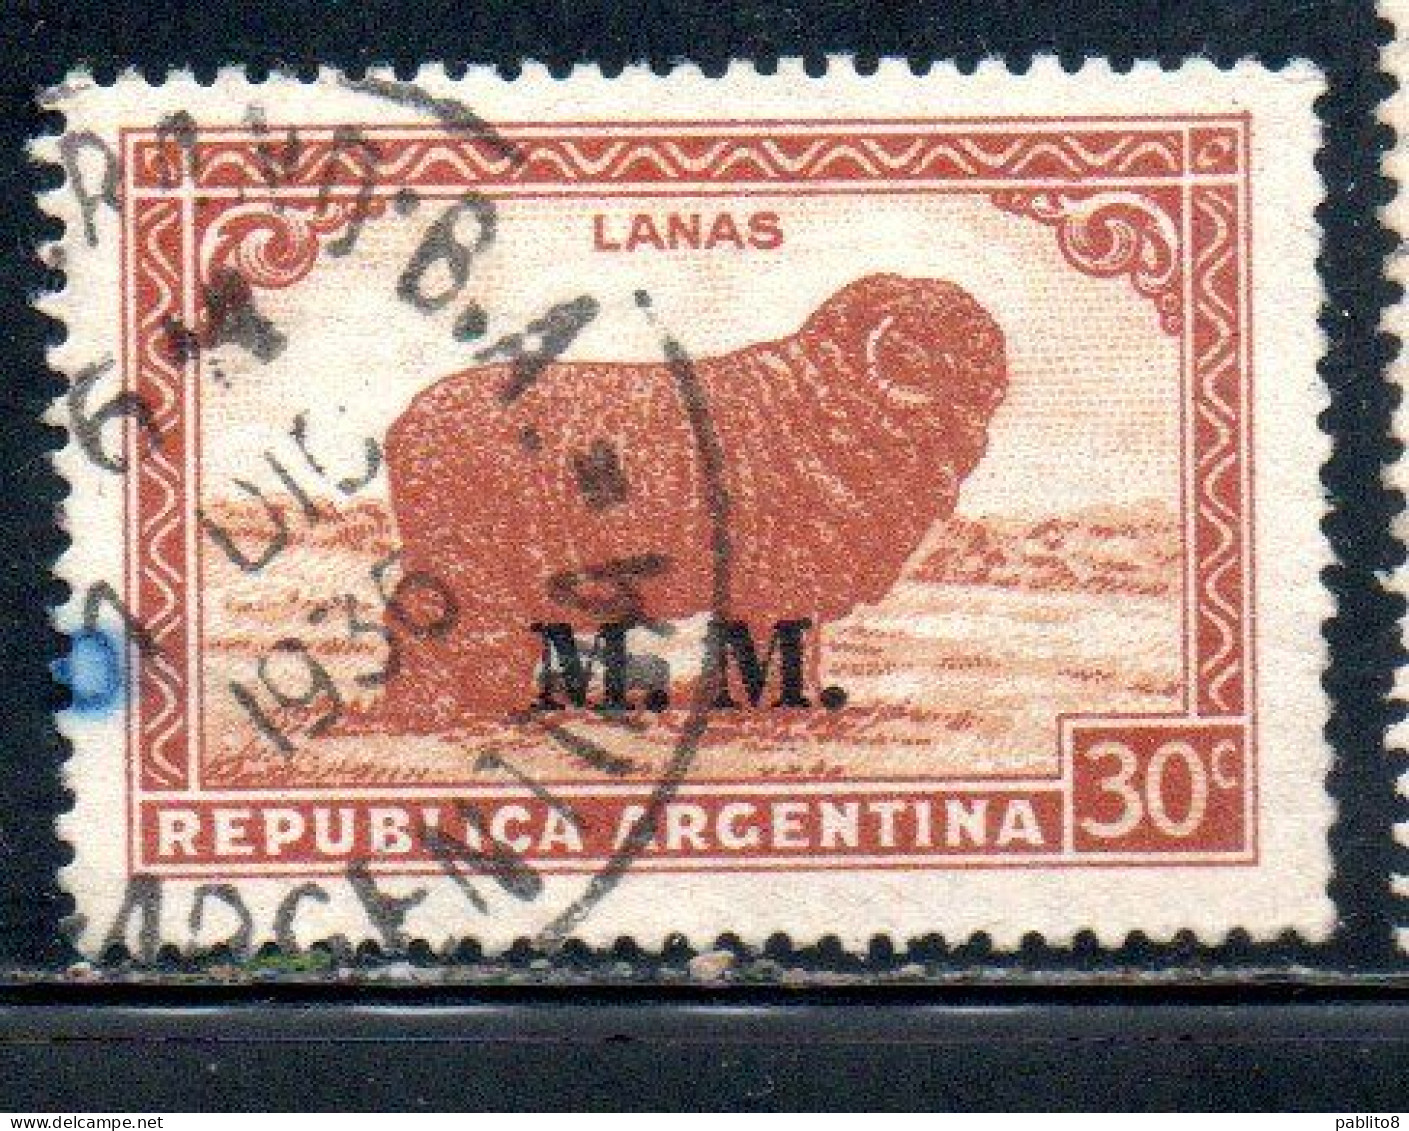 ARGENTINA 1935 1937 OFFICIAL DEPARTMENT STAMP OVERPRINTED M.M. MINISTRY OF MARINE MM 30c USED USADO - Service